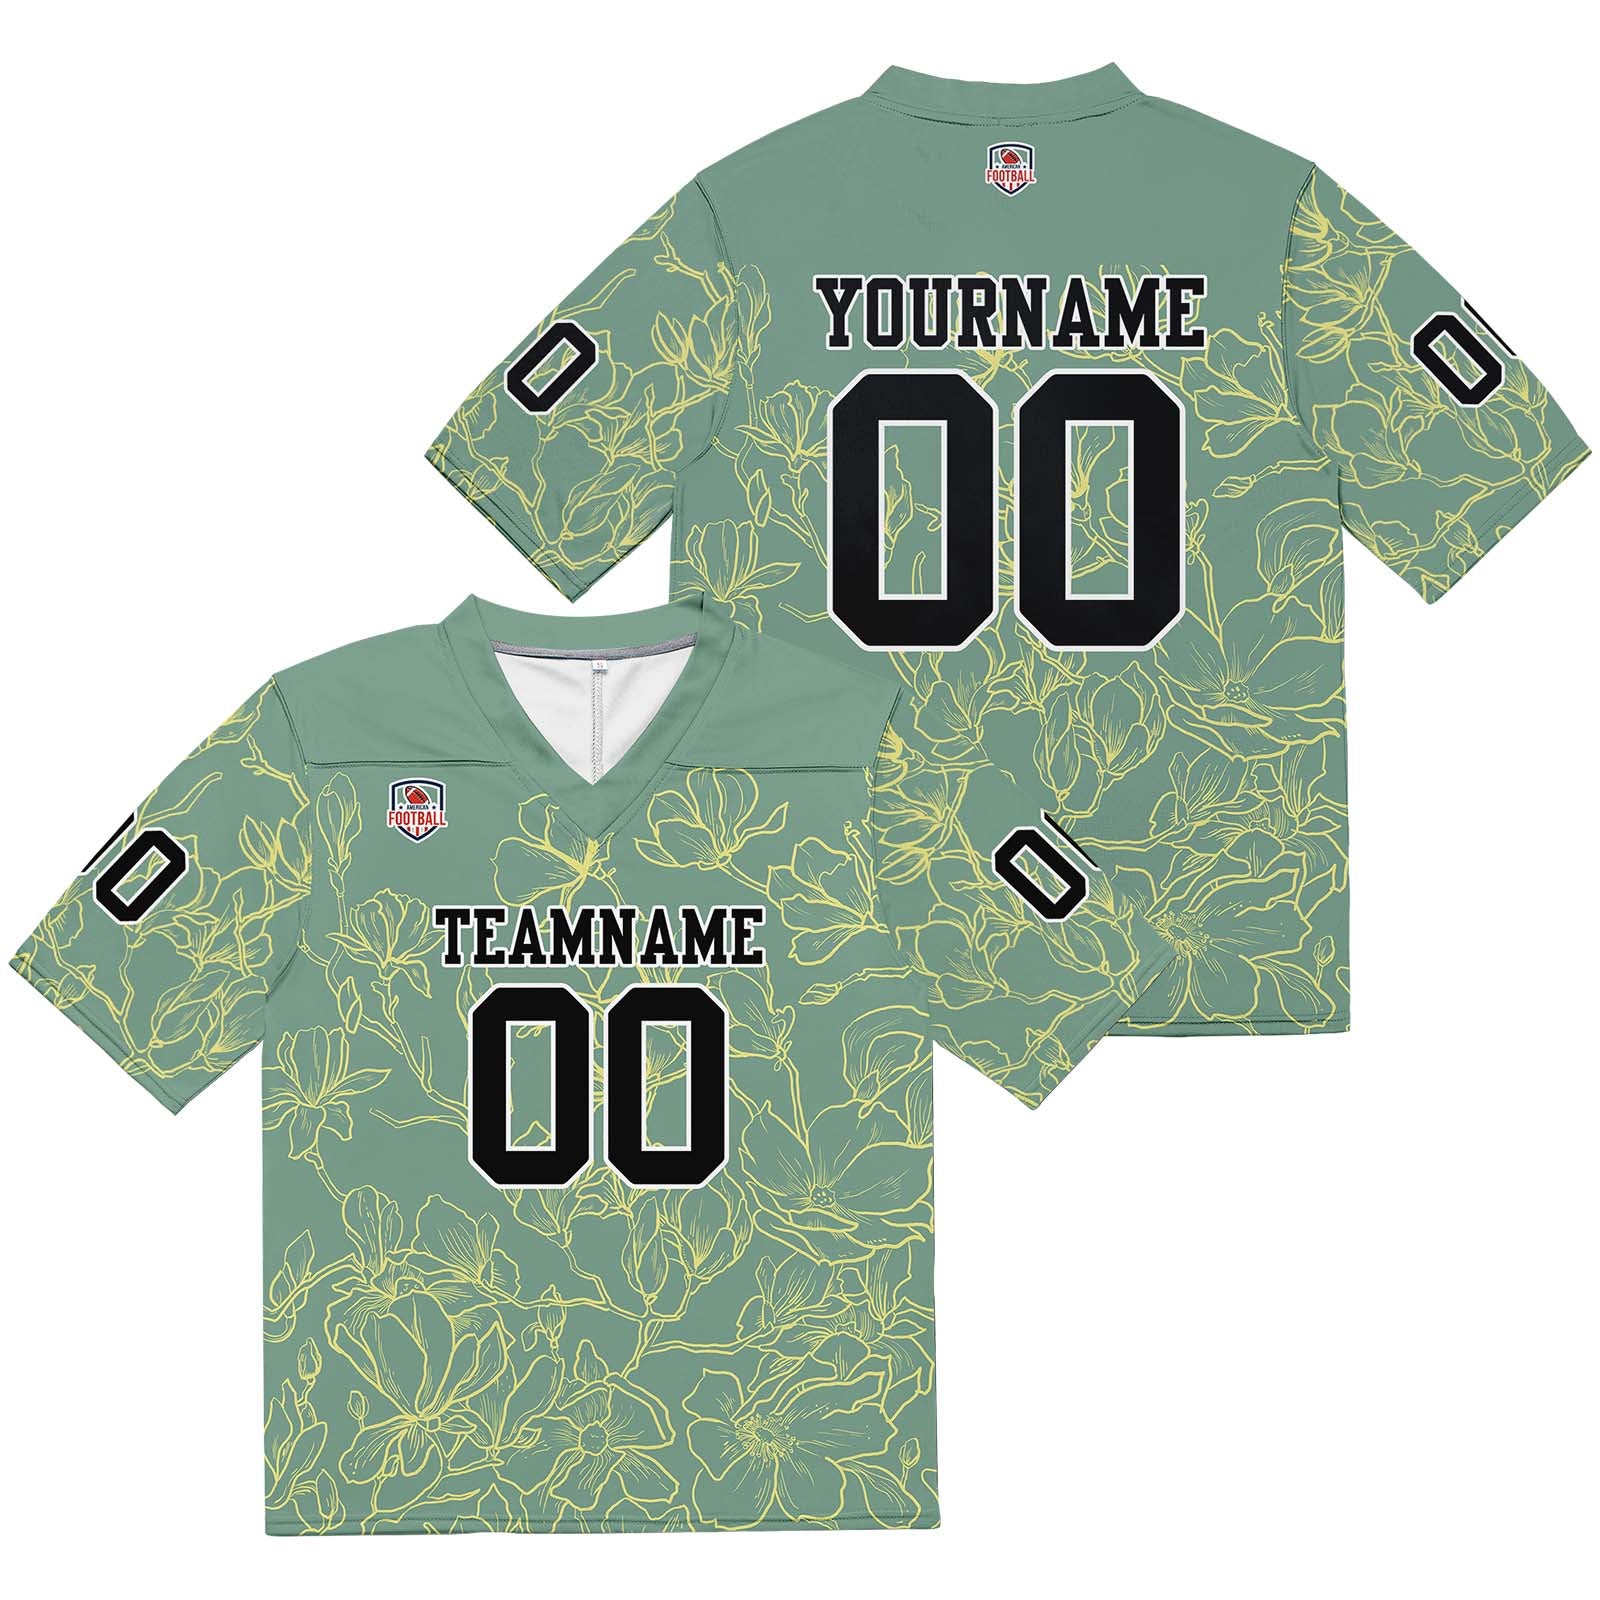 Custom Football Jersey Shirt Personalized Stitched Printed Team Name Number Grayish green & Yellow